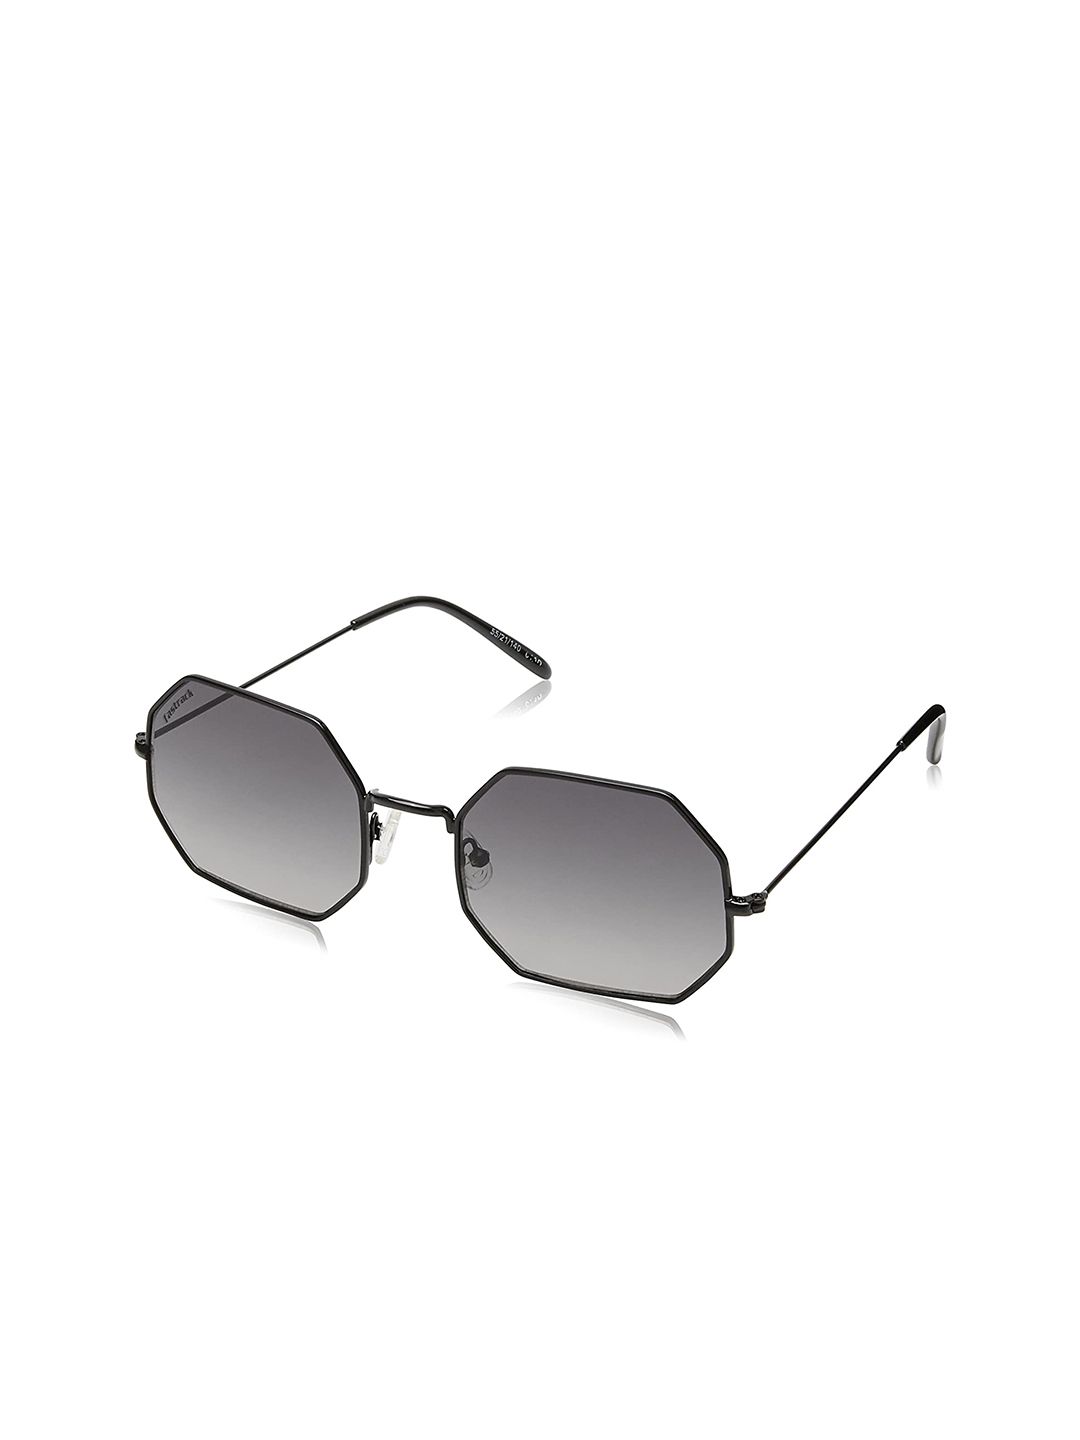 Fastrack Unisex Black Lens & Black Other Sunglasses with UV Protected Lens M152BK1 Price in India